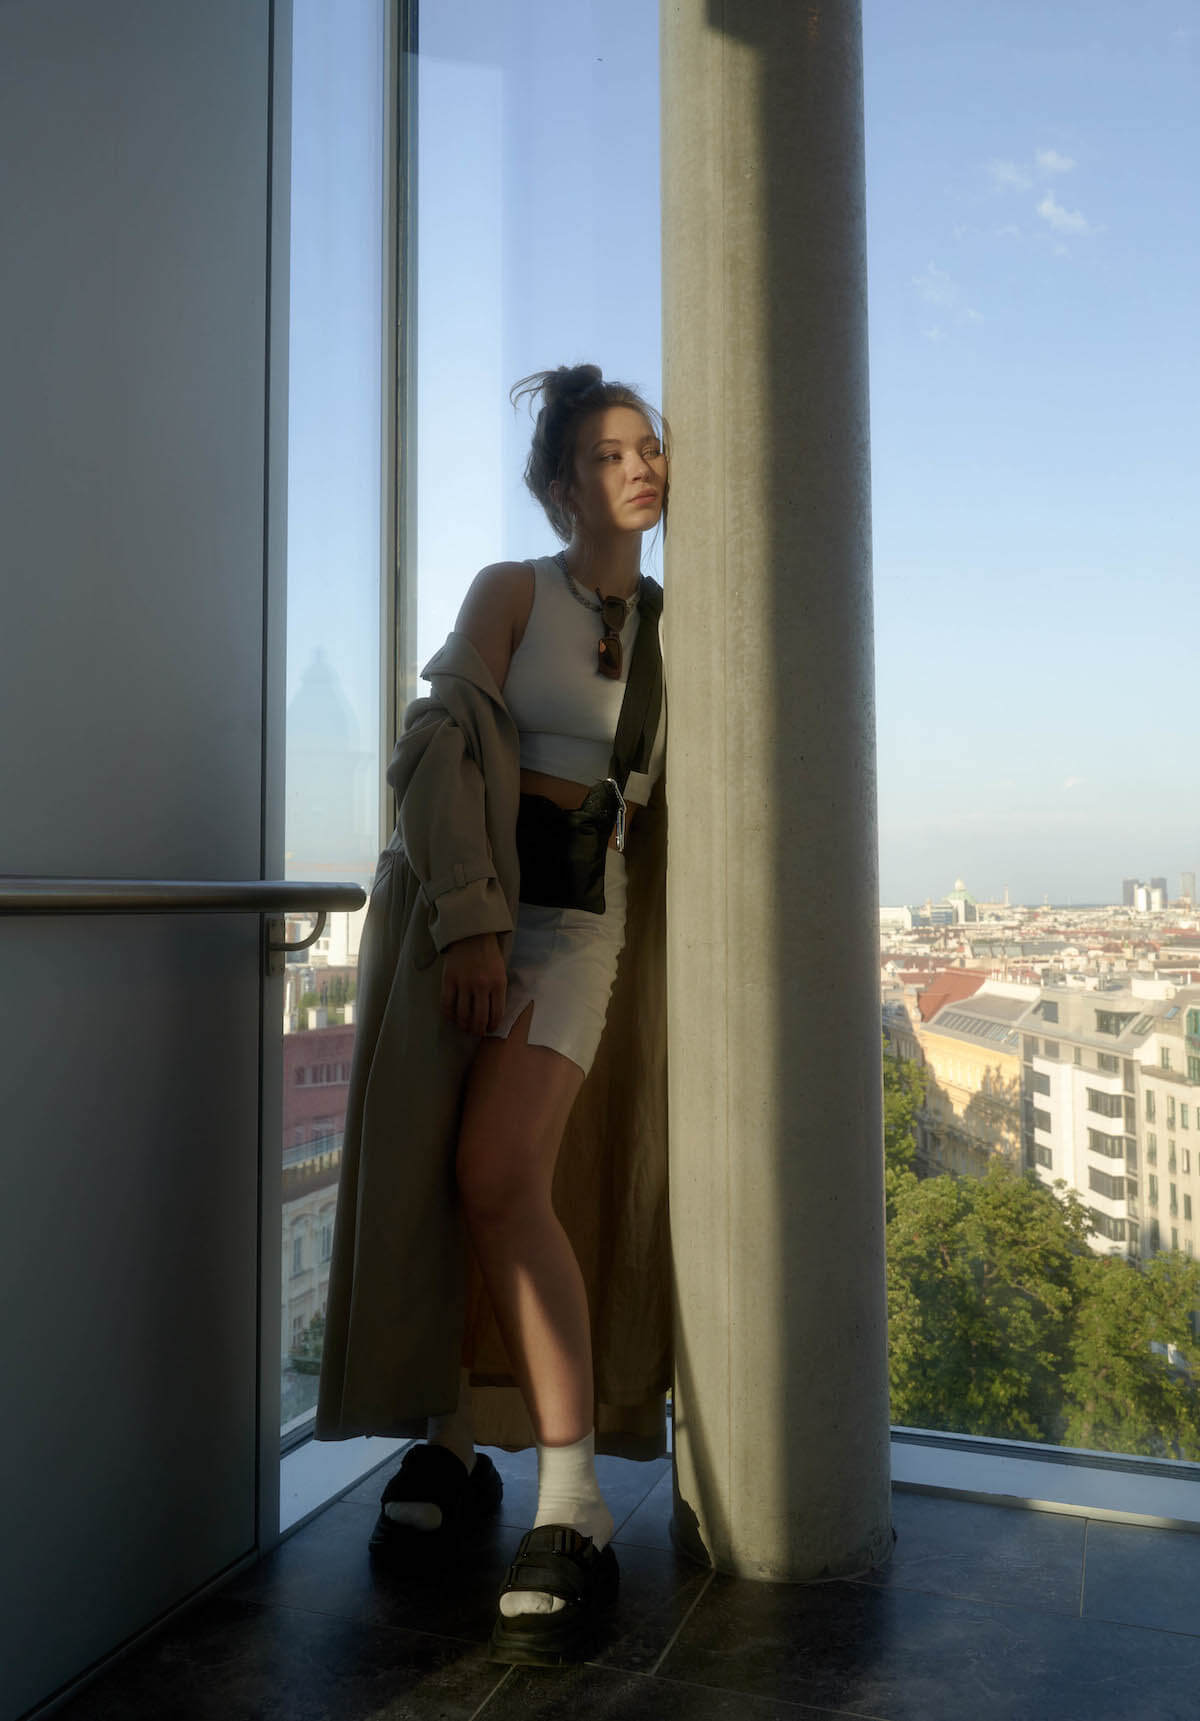 Young woman leaning against a column in front of a floor-to-ceiling window. Her long hair is tied up in a chignon, she wears a white crop top, a white short skirt, white socks in black sandals with high soles. She carries a shoulder bag from her right shoulder to her left hip and a long sand-colored coat that she lets fall off her shoulder. There are sunglasses hanging from the collar of her top. She looks to the right out of the picture.